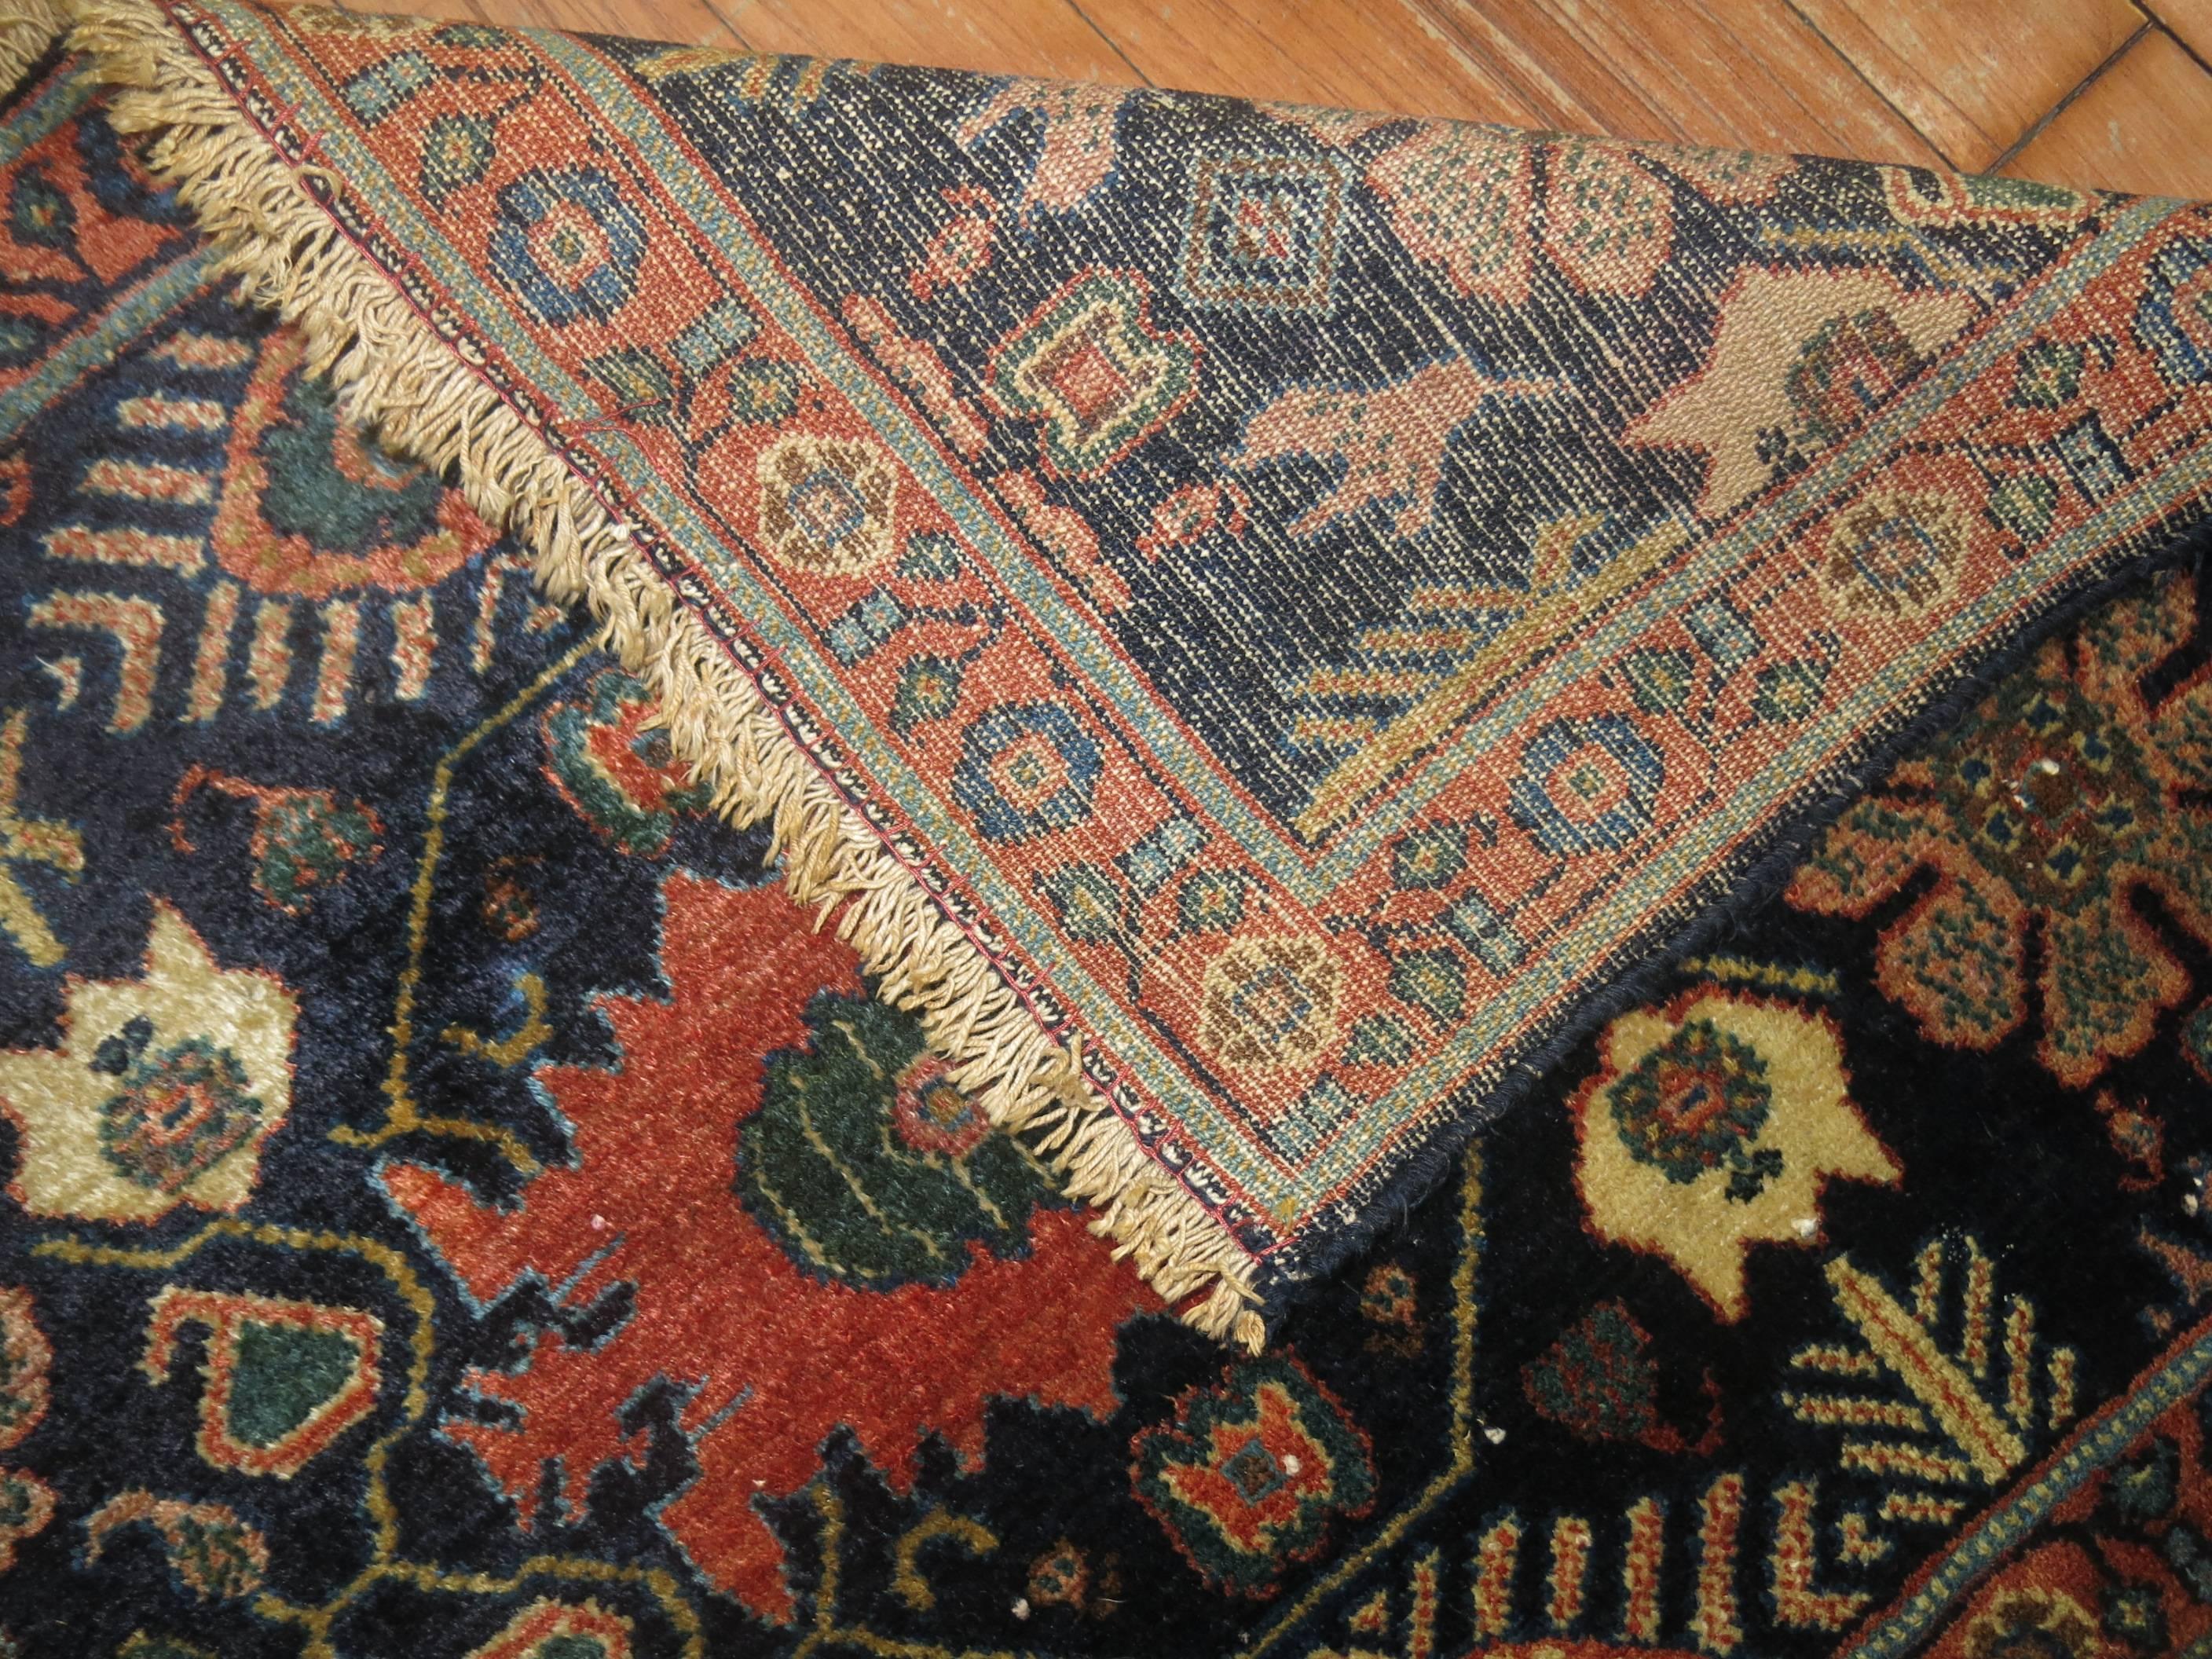 High quality Persian Senneh rug mat from the early stages of the 20th century. Navy blue ground with multi vibrant accents.